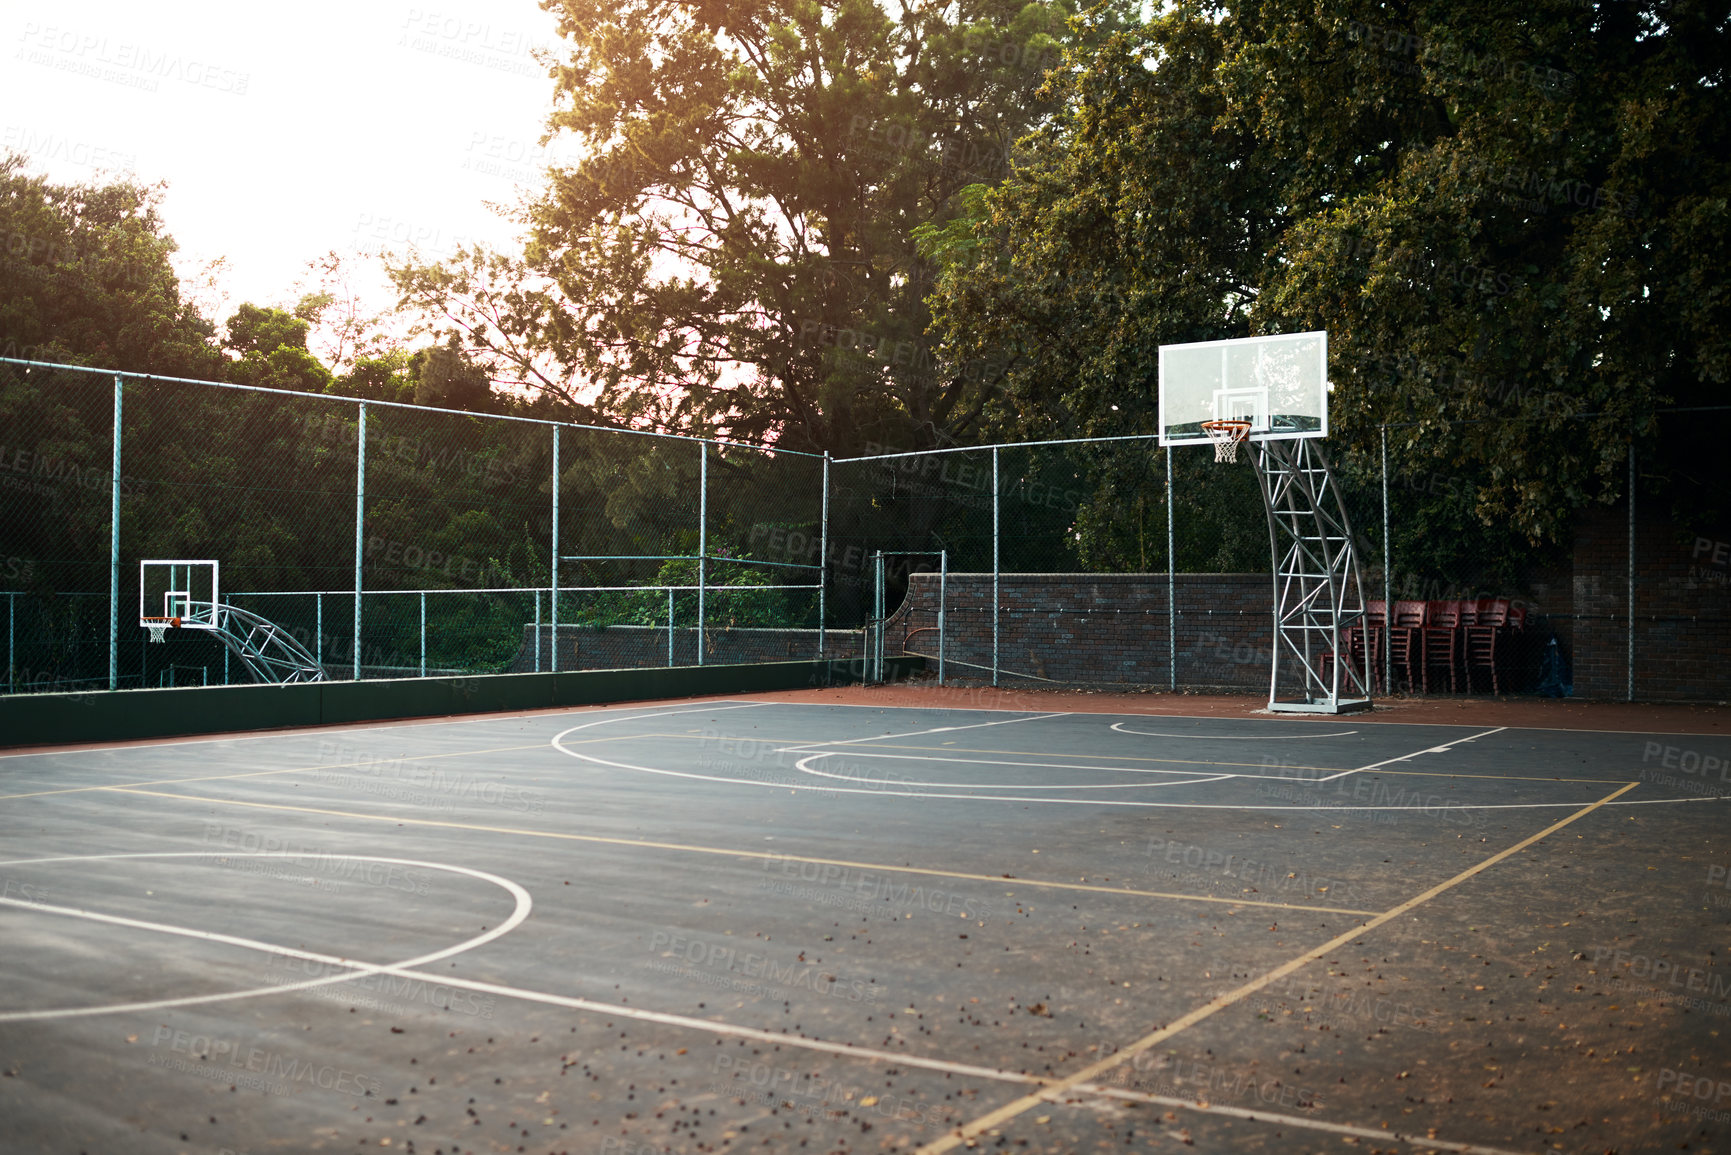 Buy stock photo Cropped shot of an empty basketball court after a match during the day